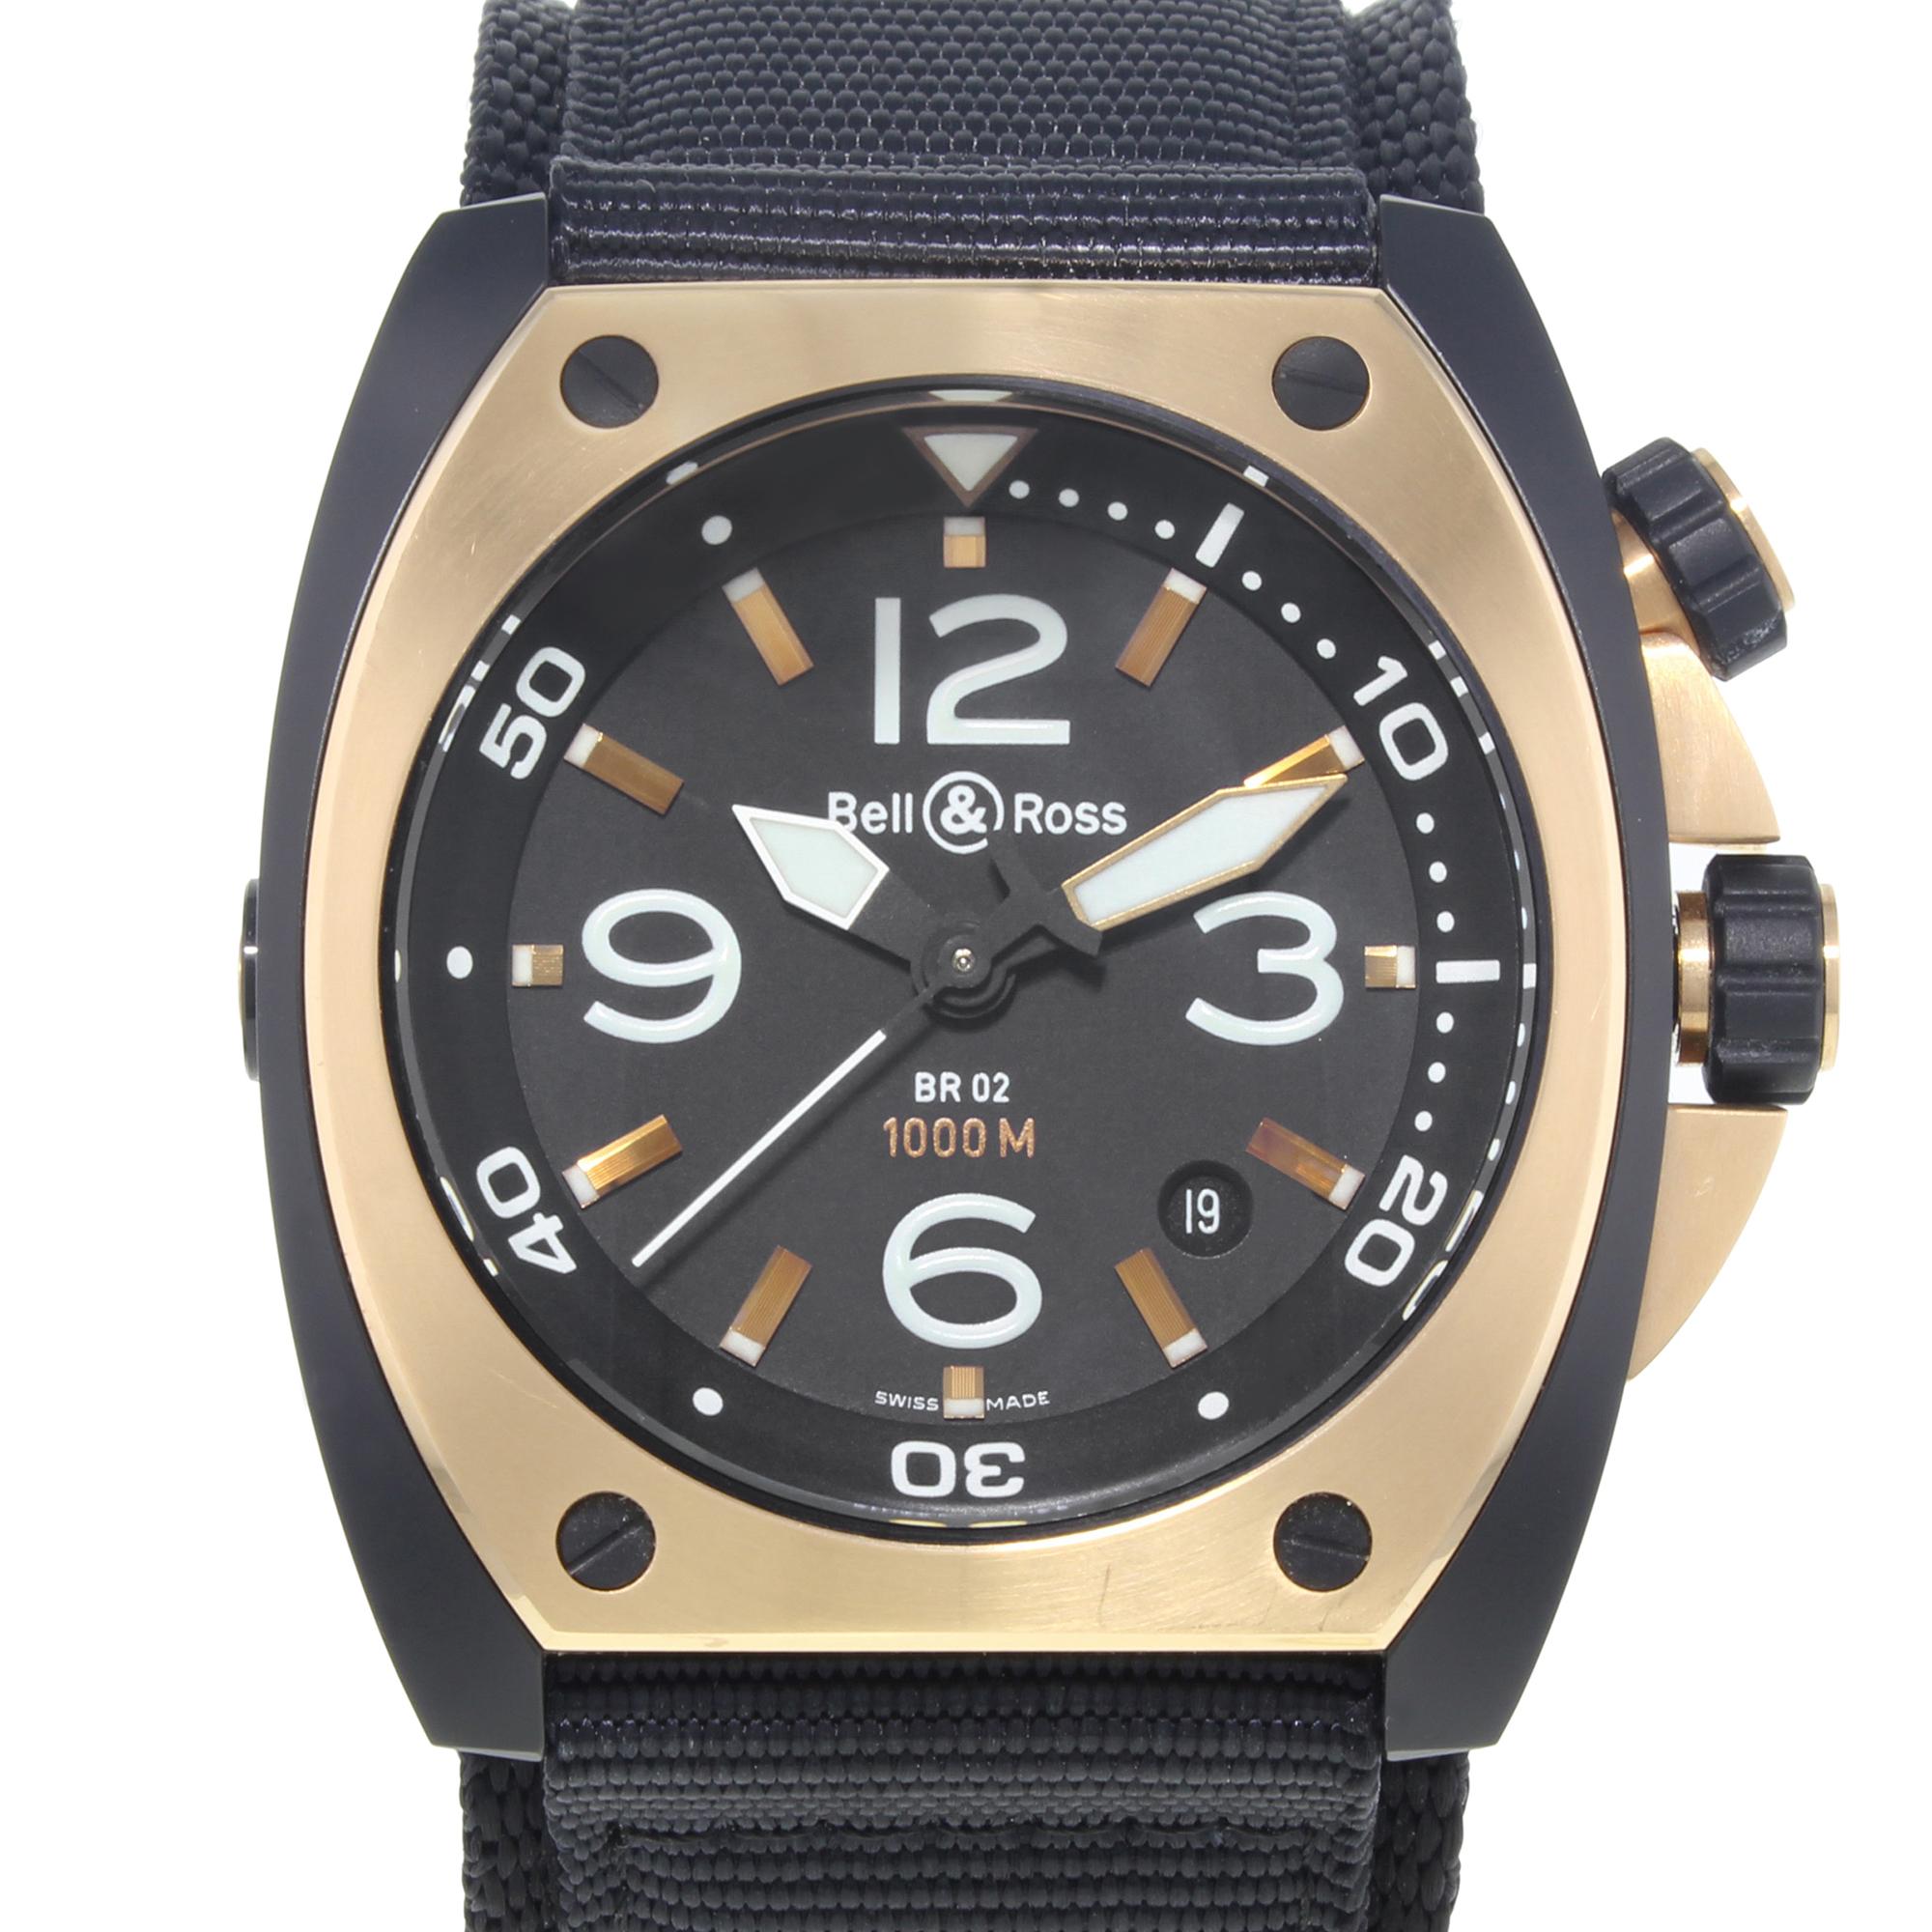 This display model Bell & Ross Marine BR02‑PINK GOLD‑CA is a beautiful men's timepiece that is powered by an automatic movement which is cased in a pink gold case. It has a tonneau shape face, date, gold case dial, and has hand sticks & numerals